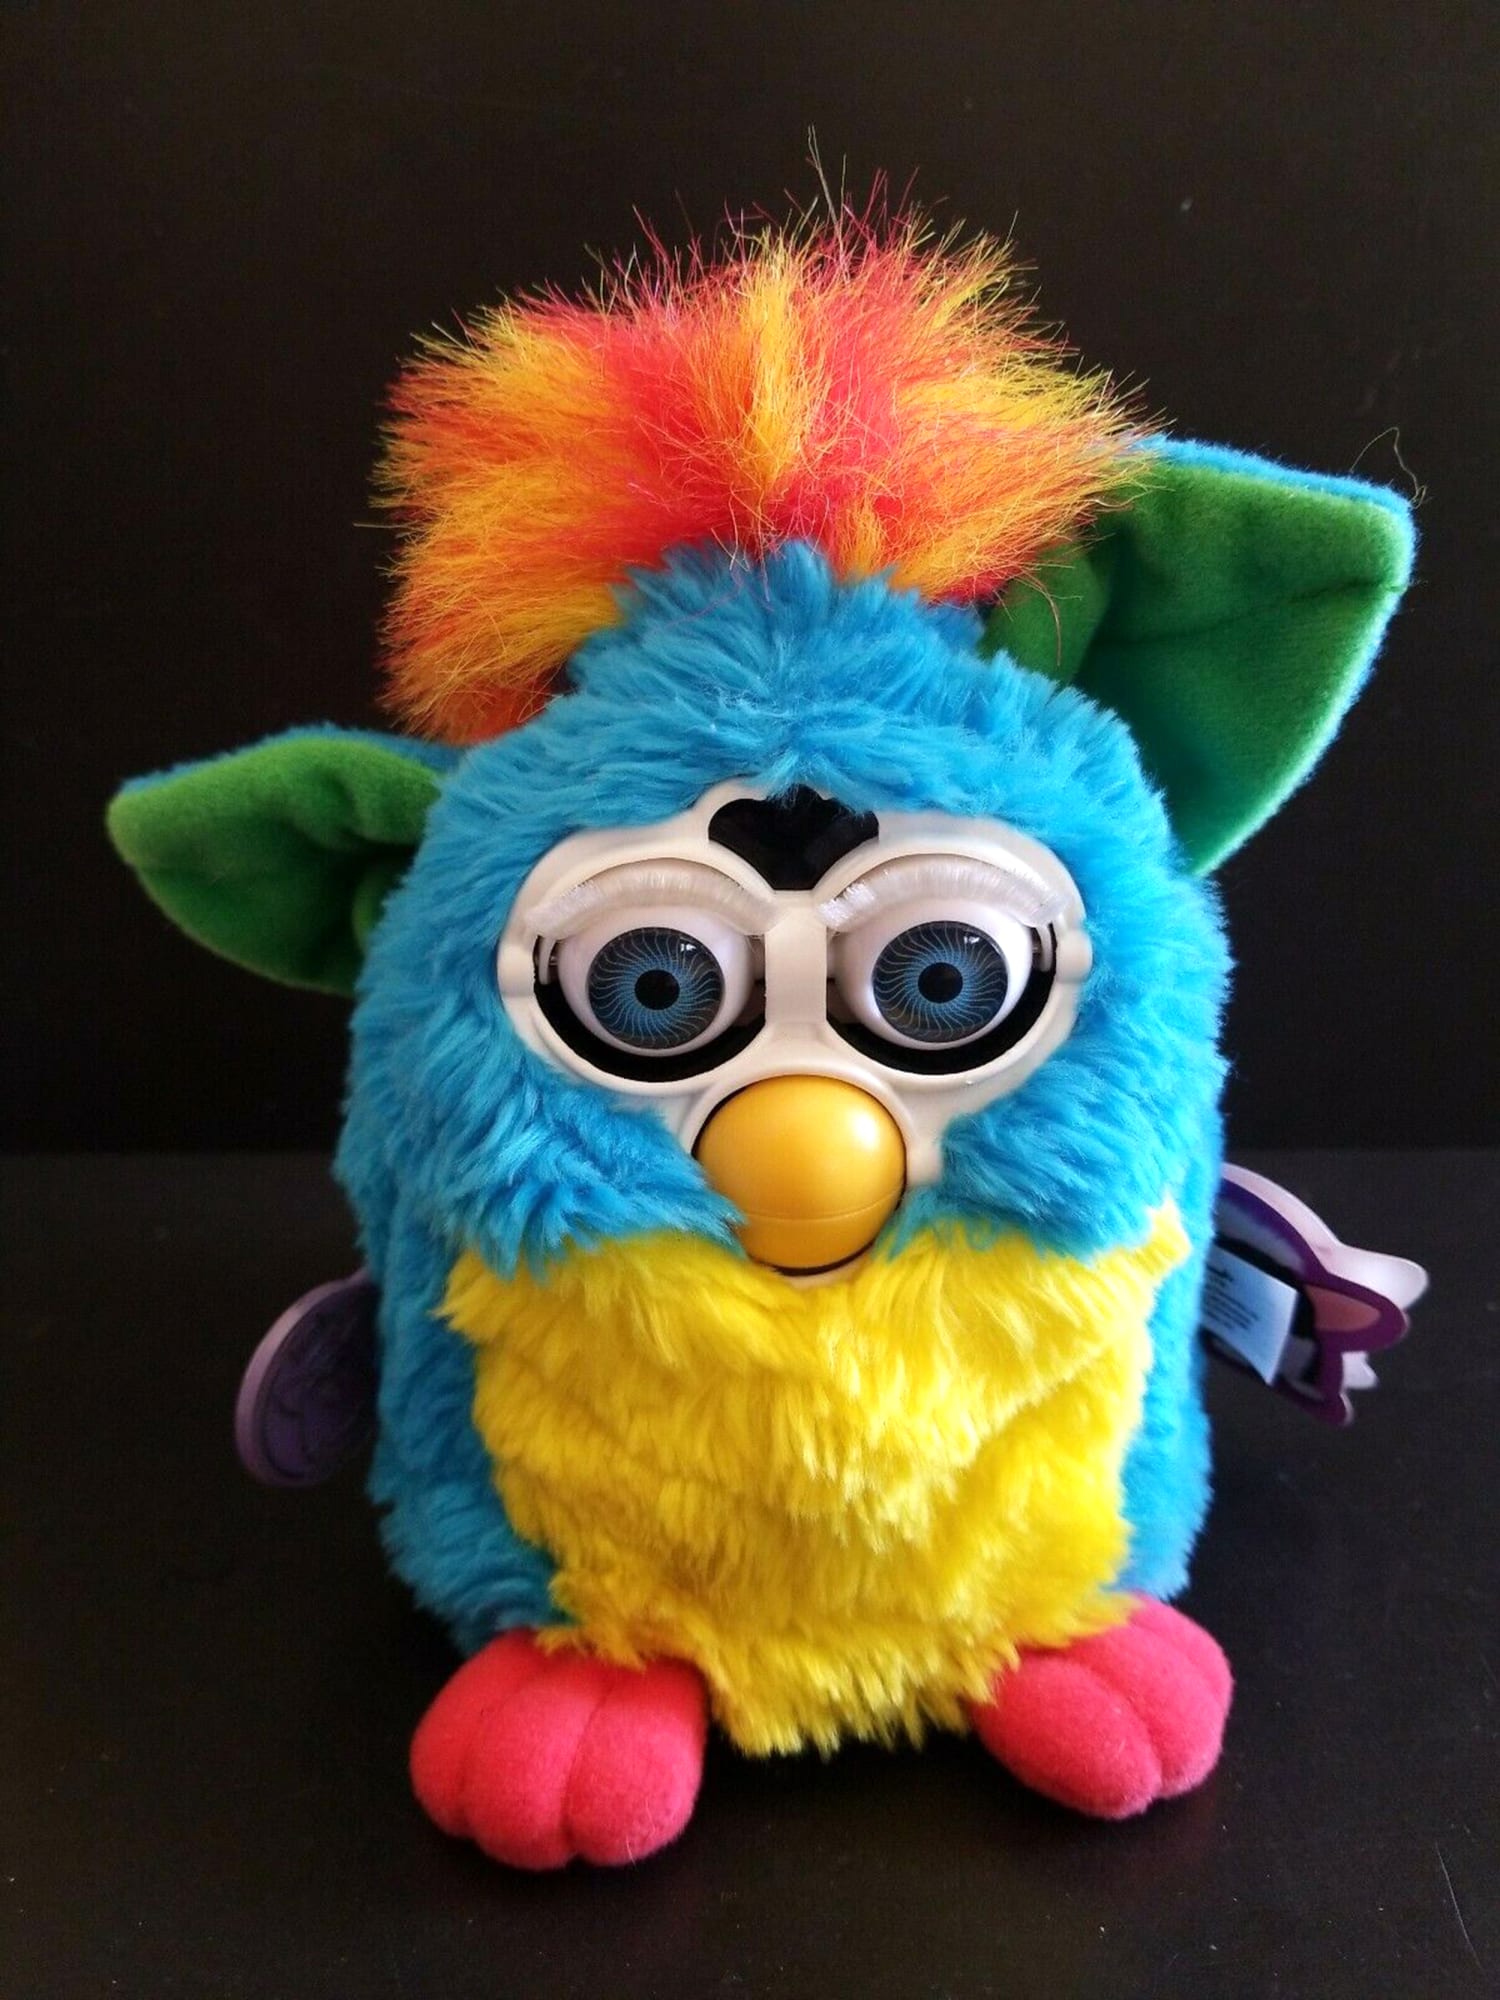 Your Furby from the '90s might actually be worth big bucks